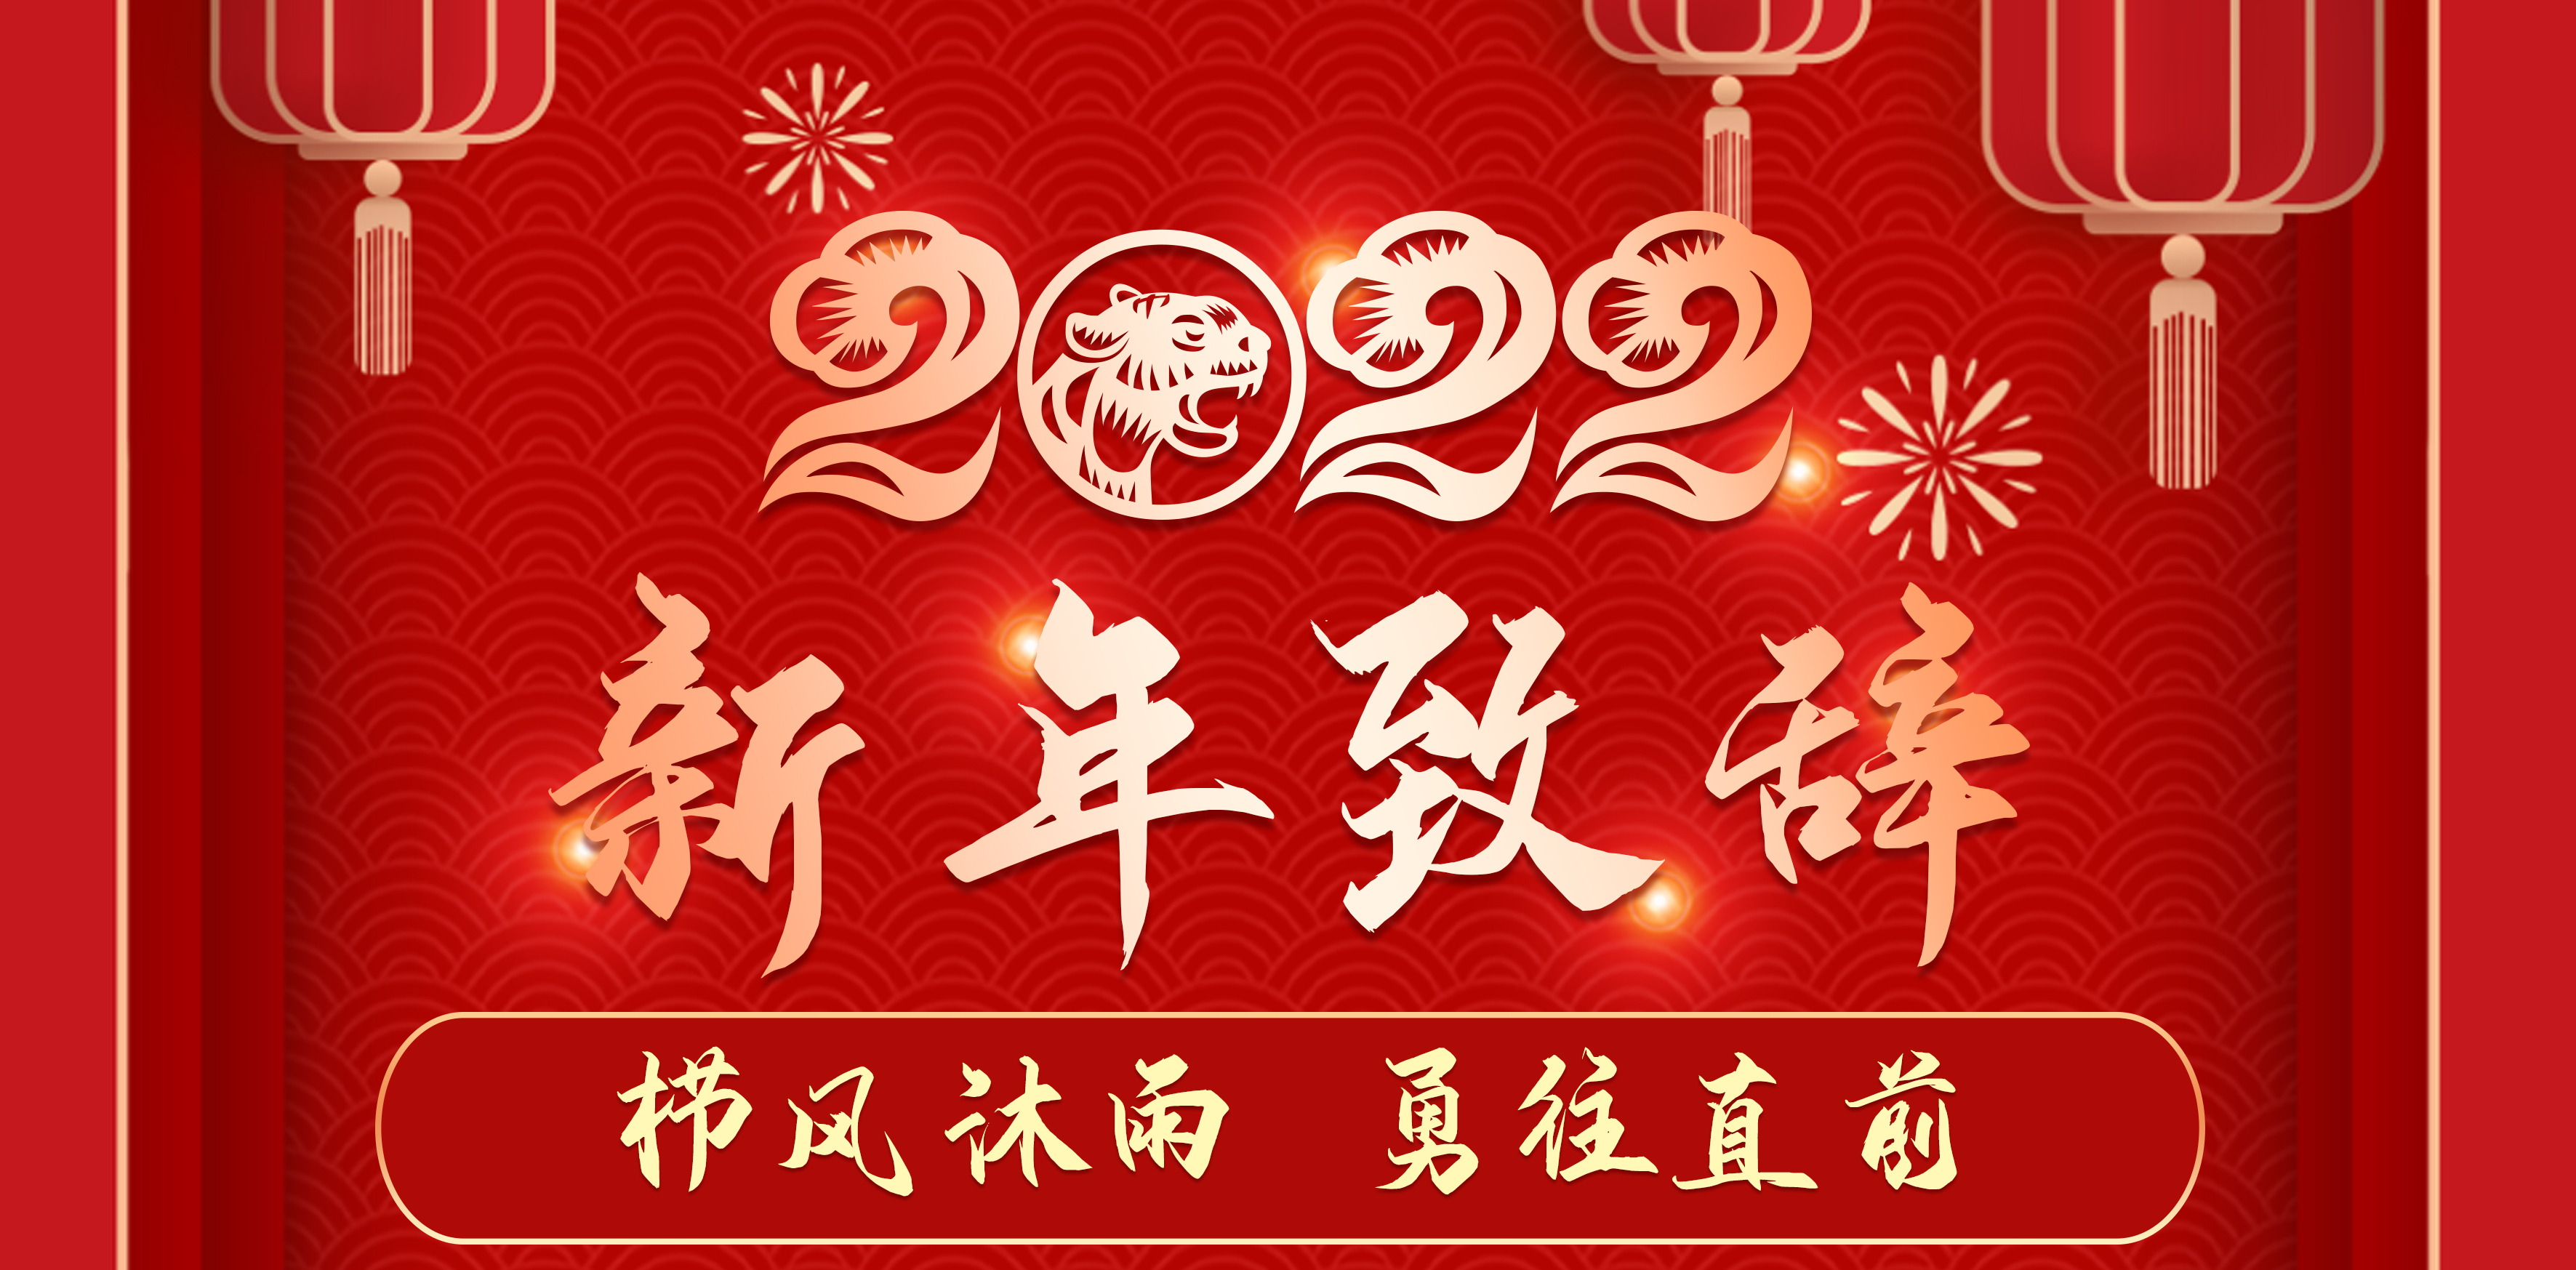 March forward bravely through the storm -- New Year's speech by the general manager of Chuangyin Technology